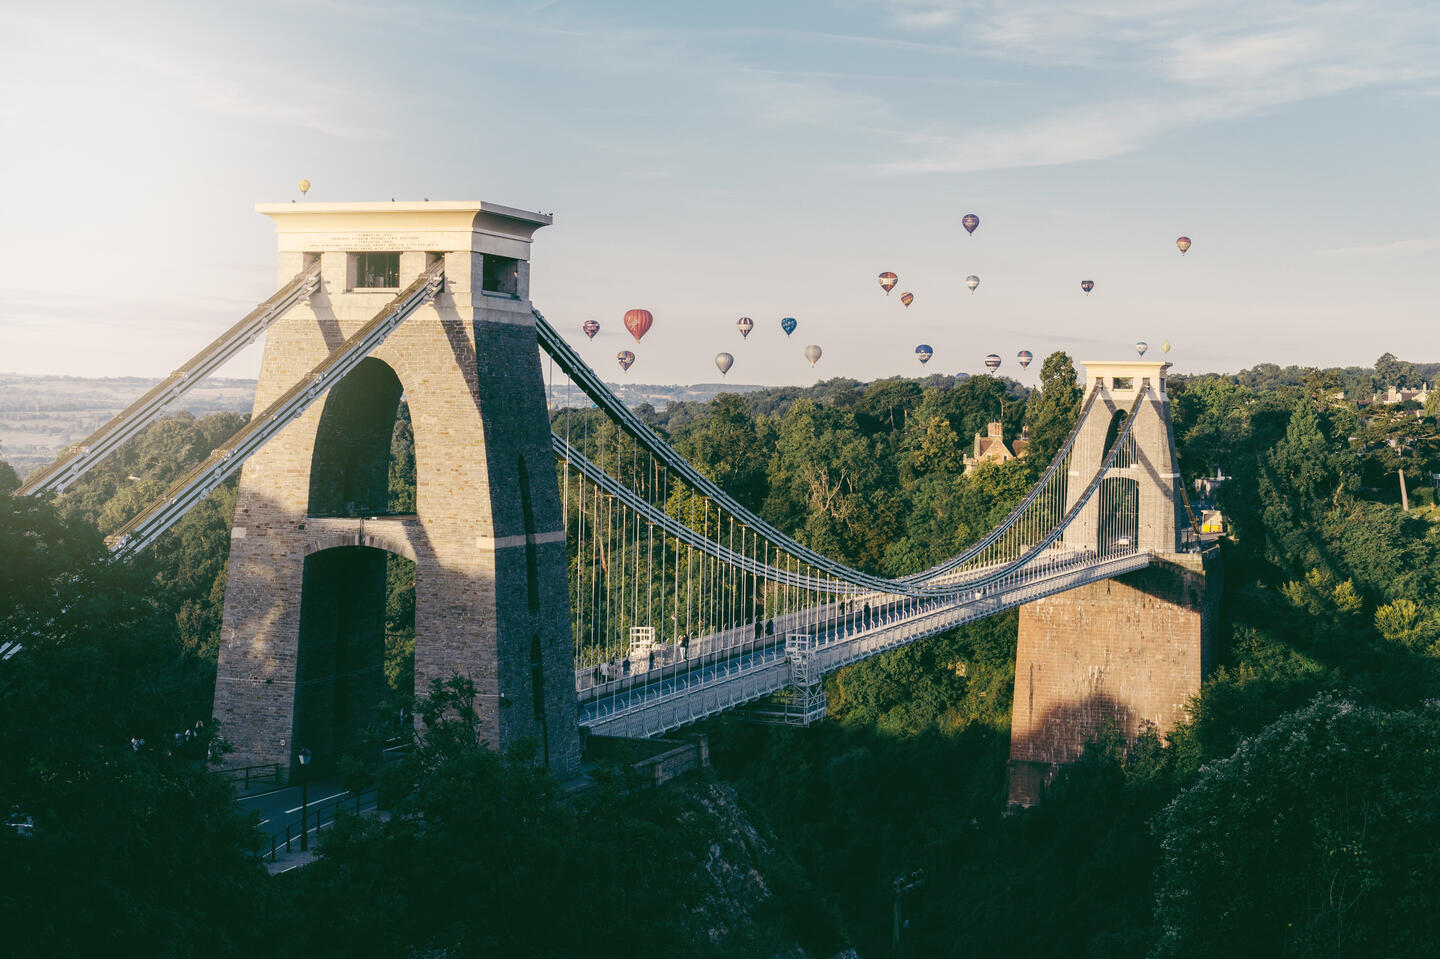 A photo of Clifton Suspension Bridge with a large number of hot air balloons in the background.